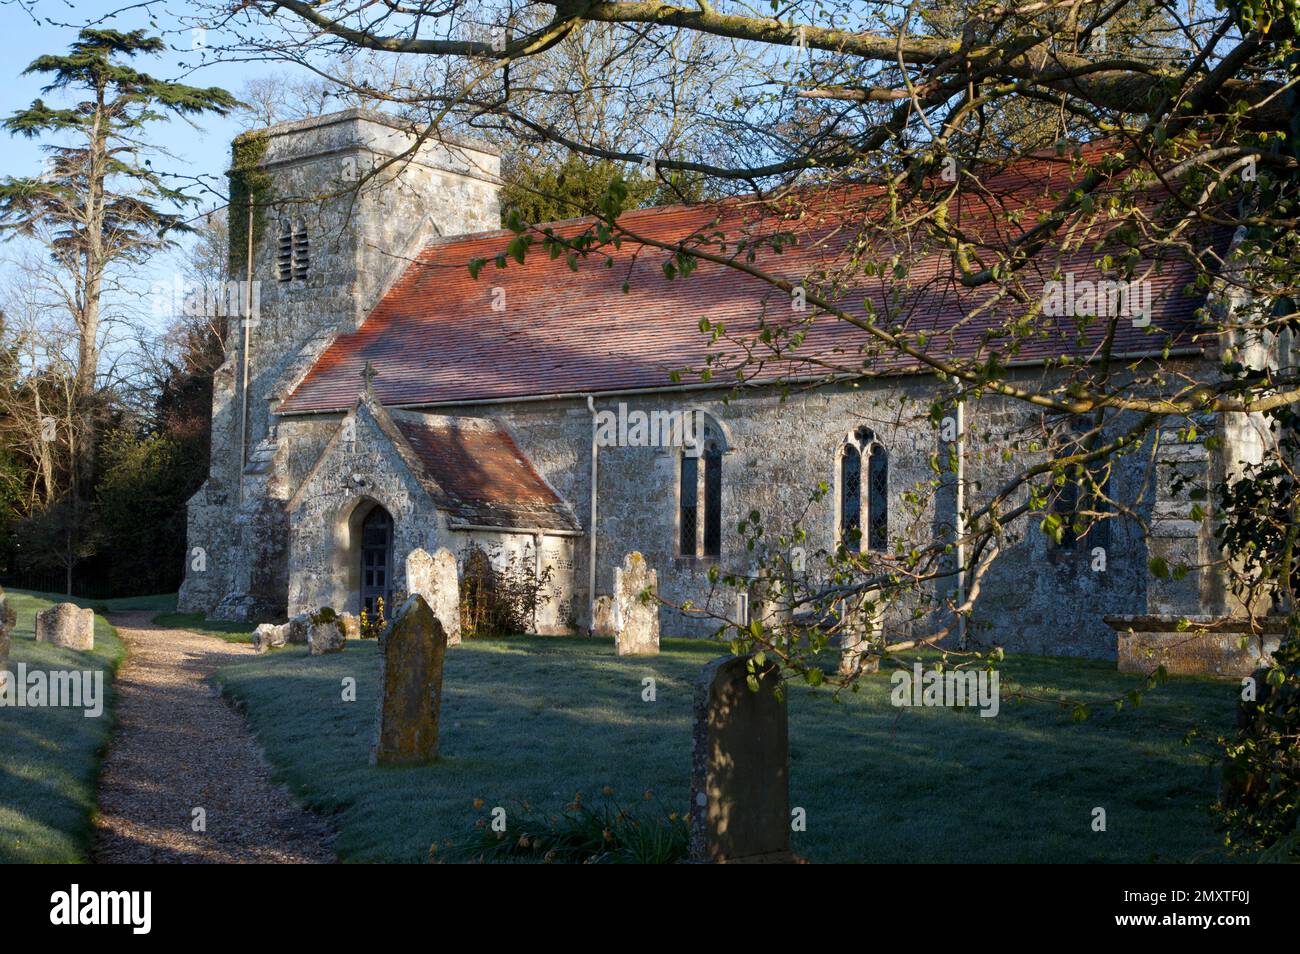 The Church of St. Editha in the small hamlet of Baverstock, near Dinton in Wiltshire. Stock Photo